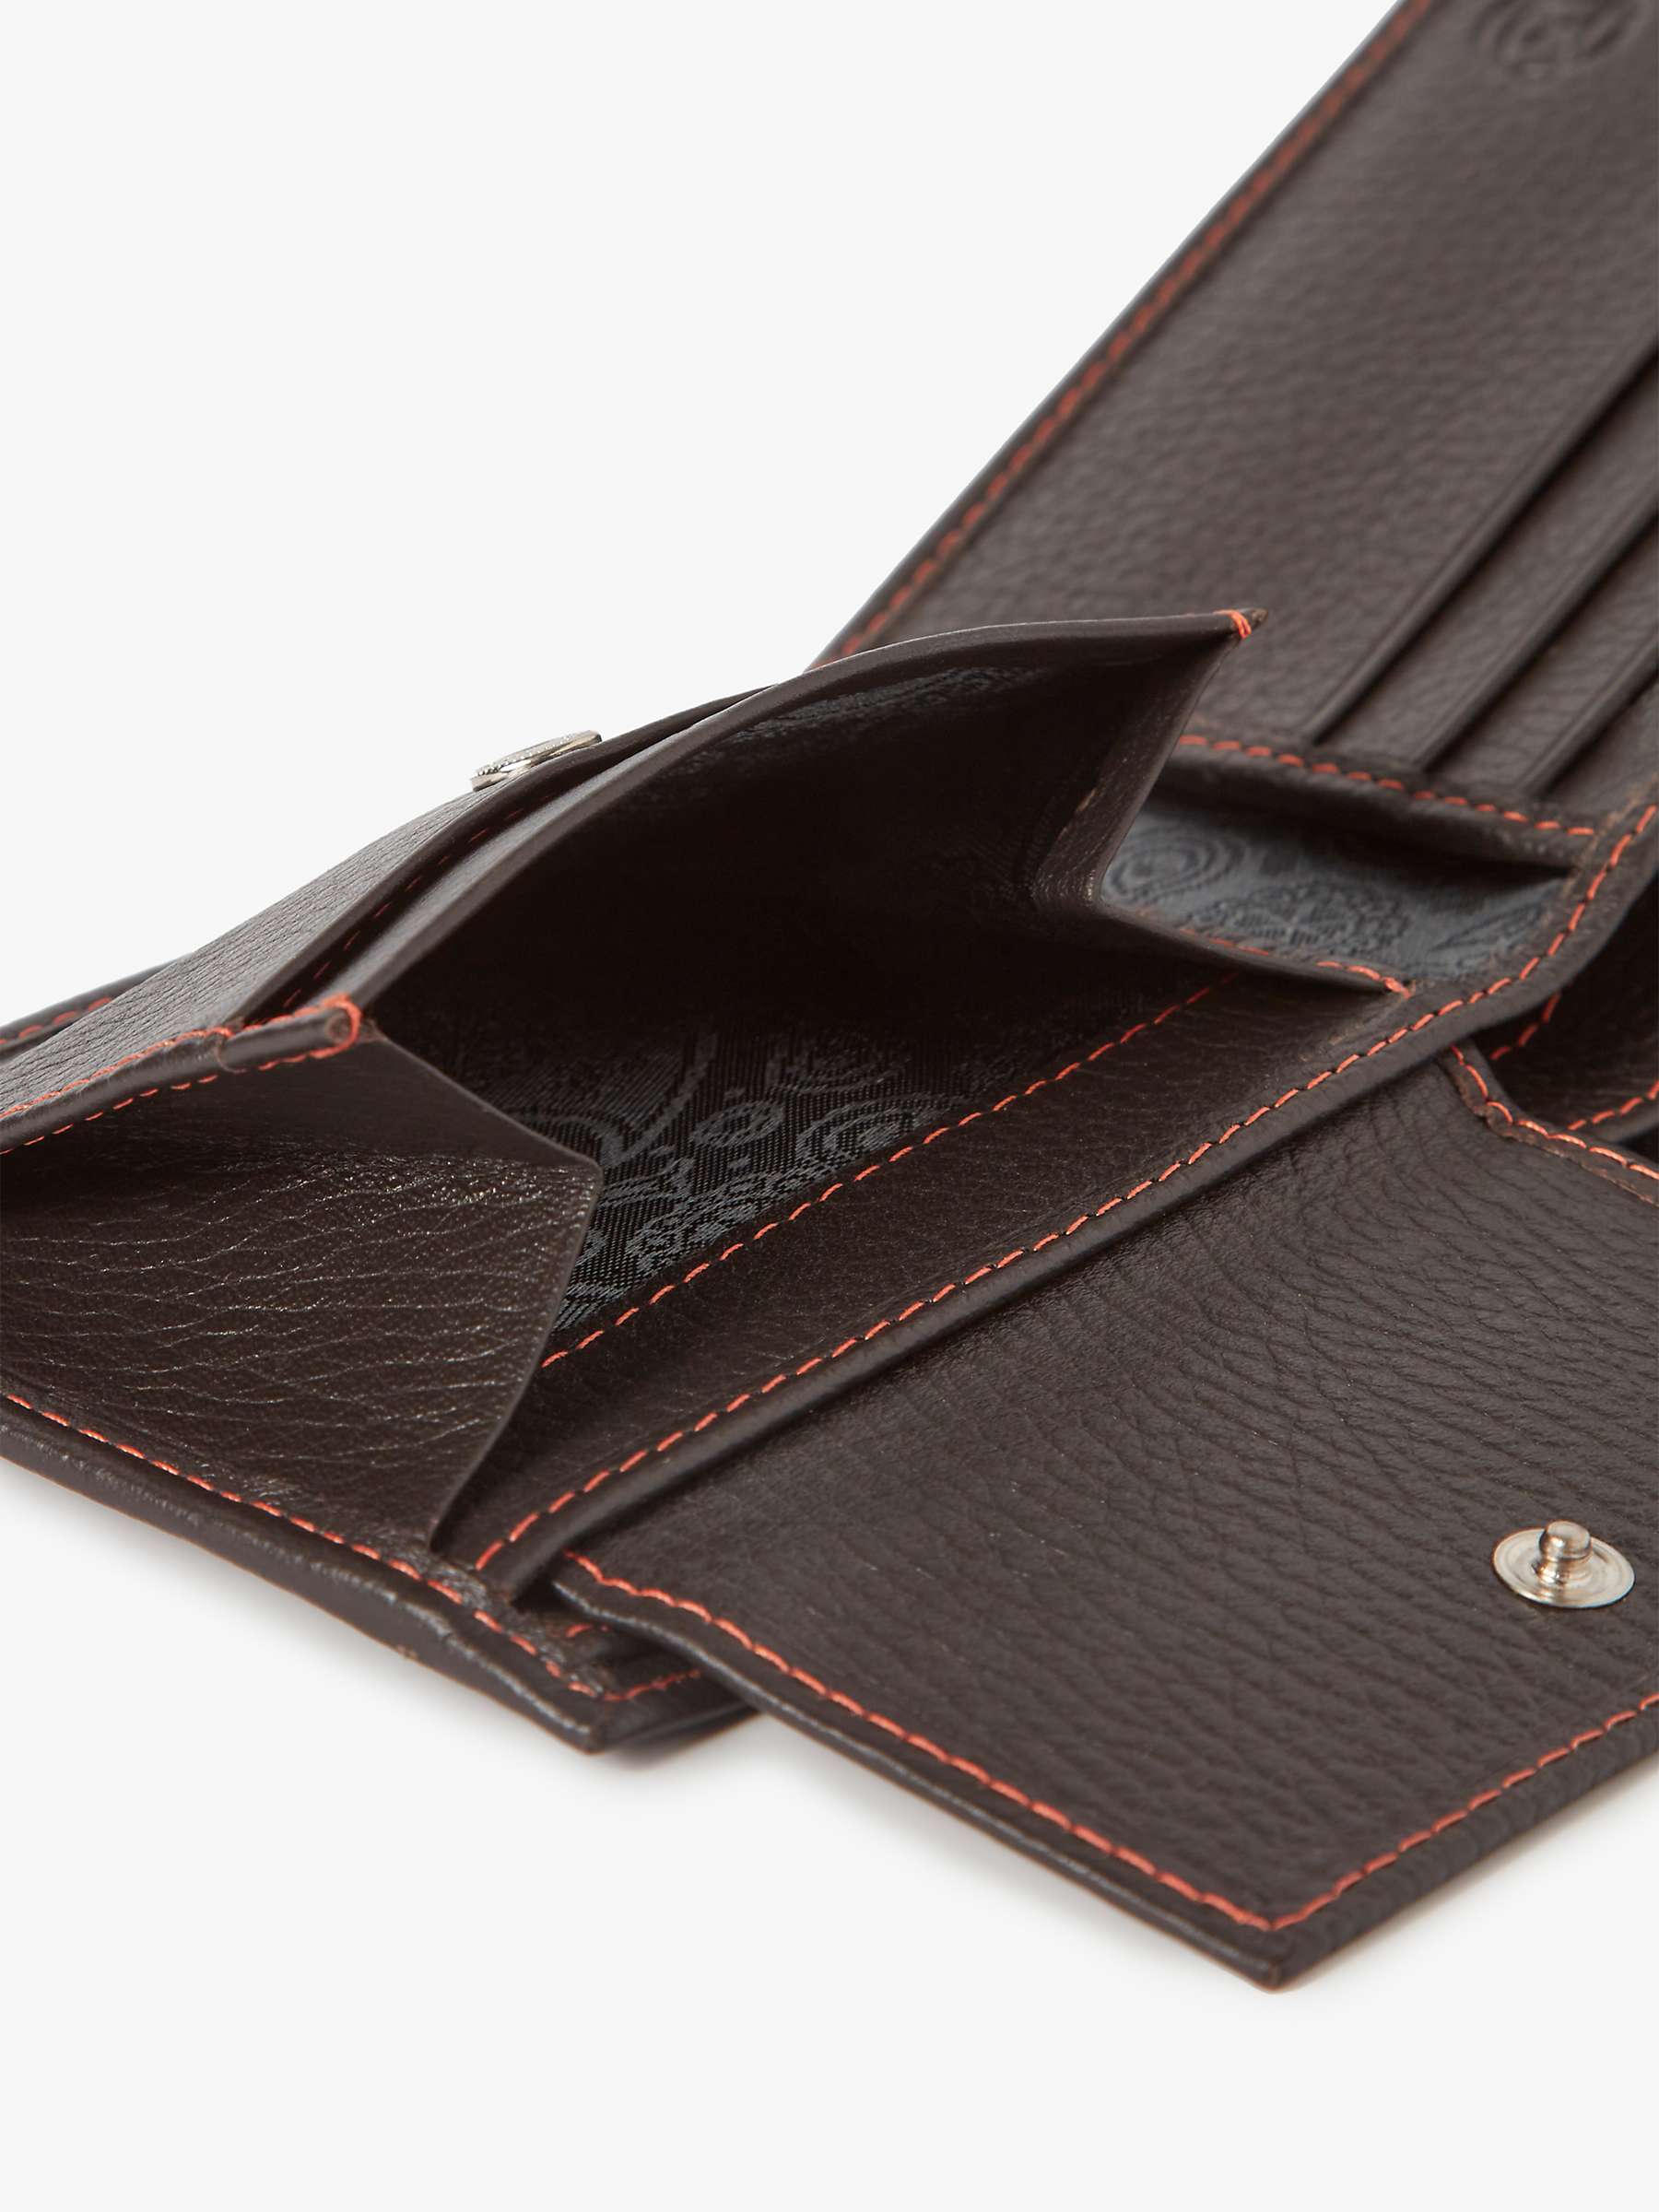 Buy Simon Carter Soft Leather Coin Wallet, Brown Online at johnlewis.com